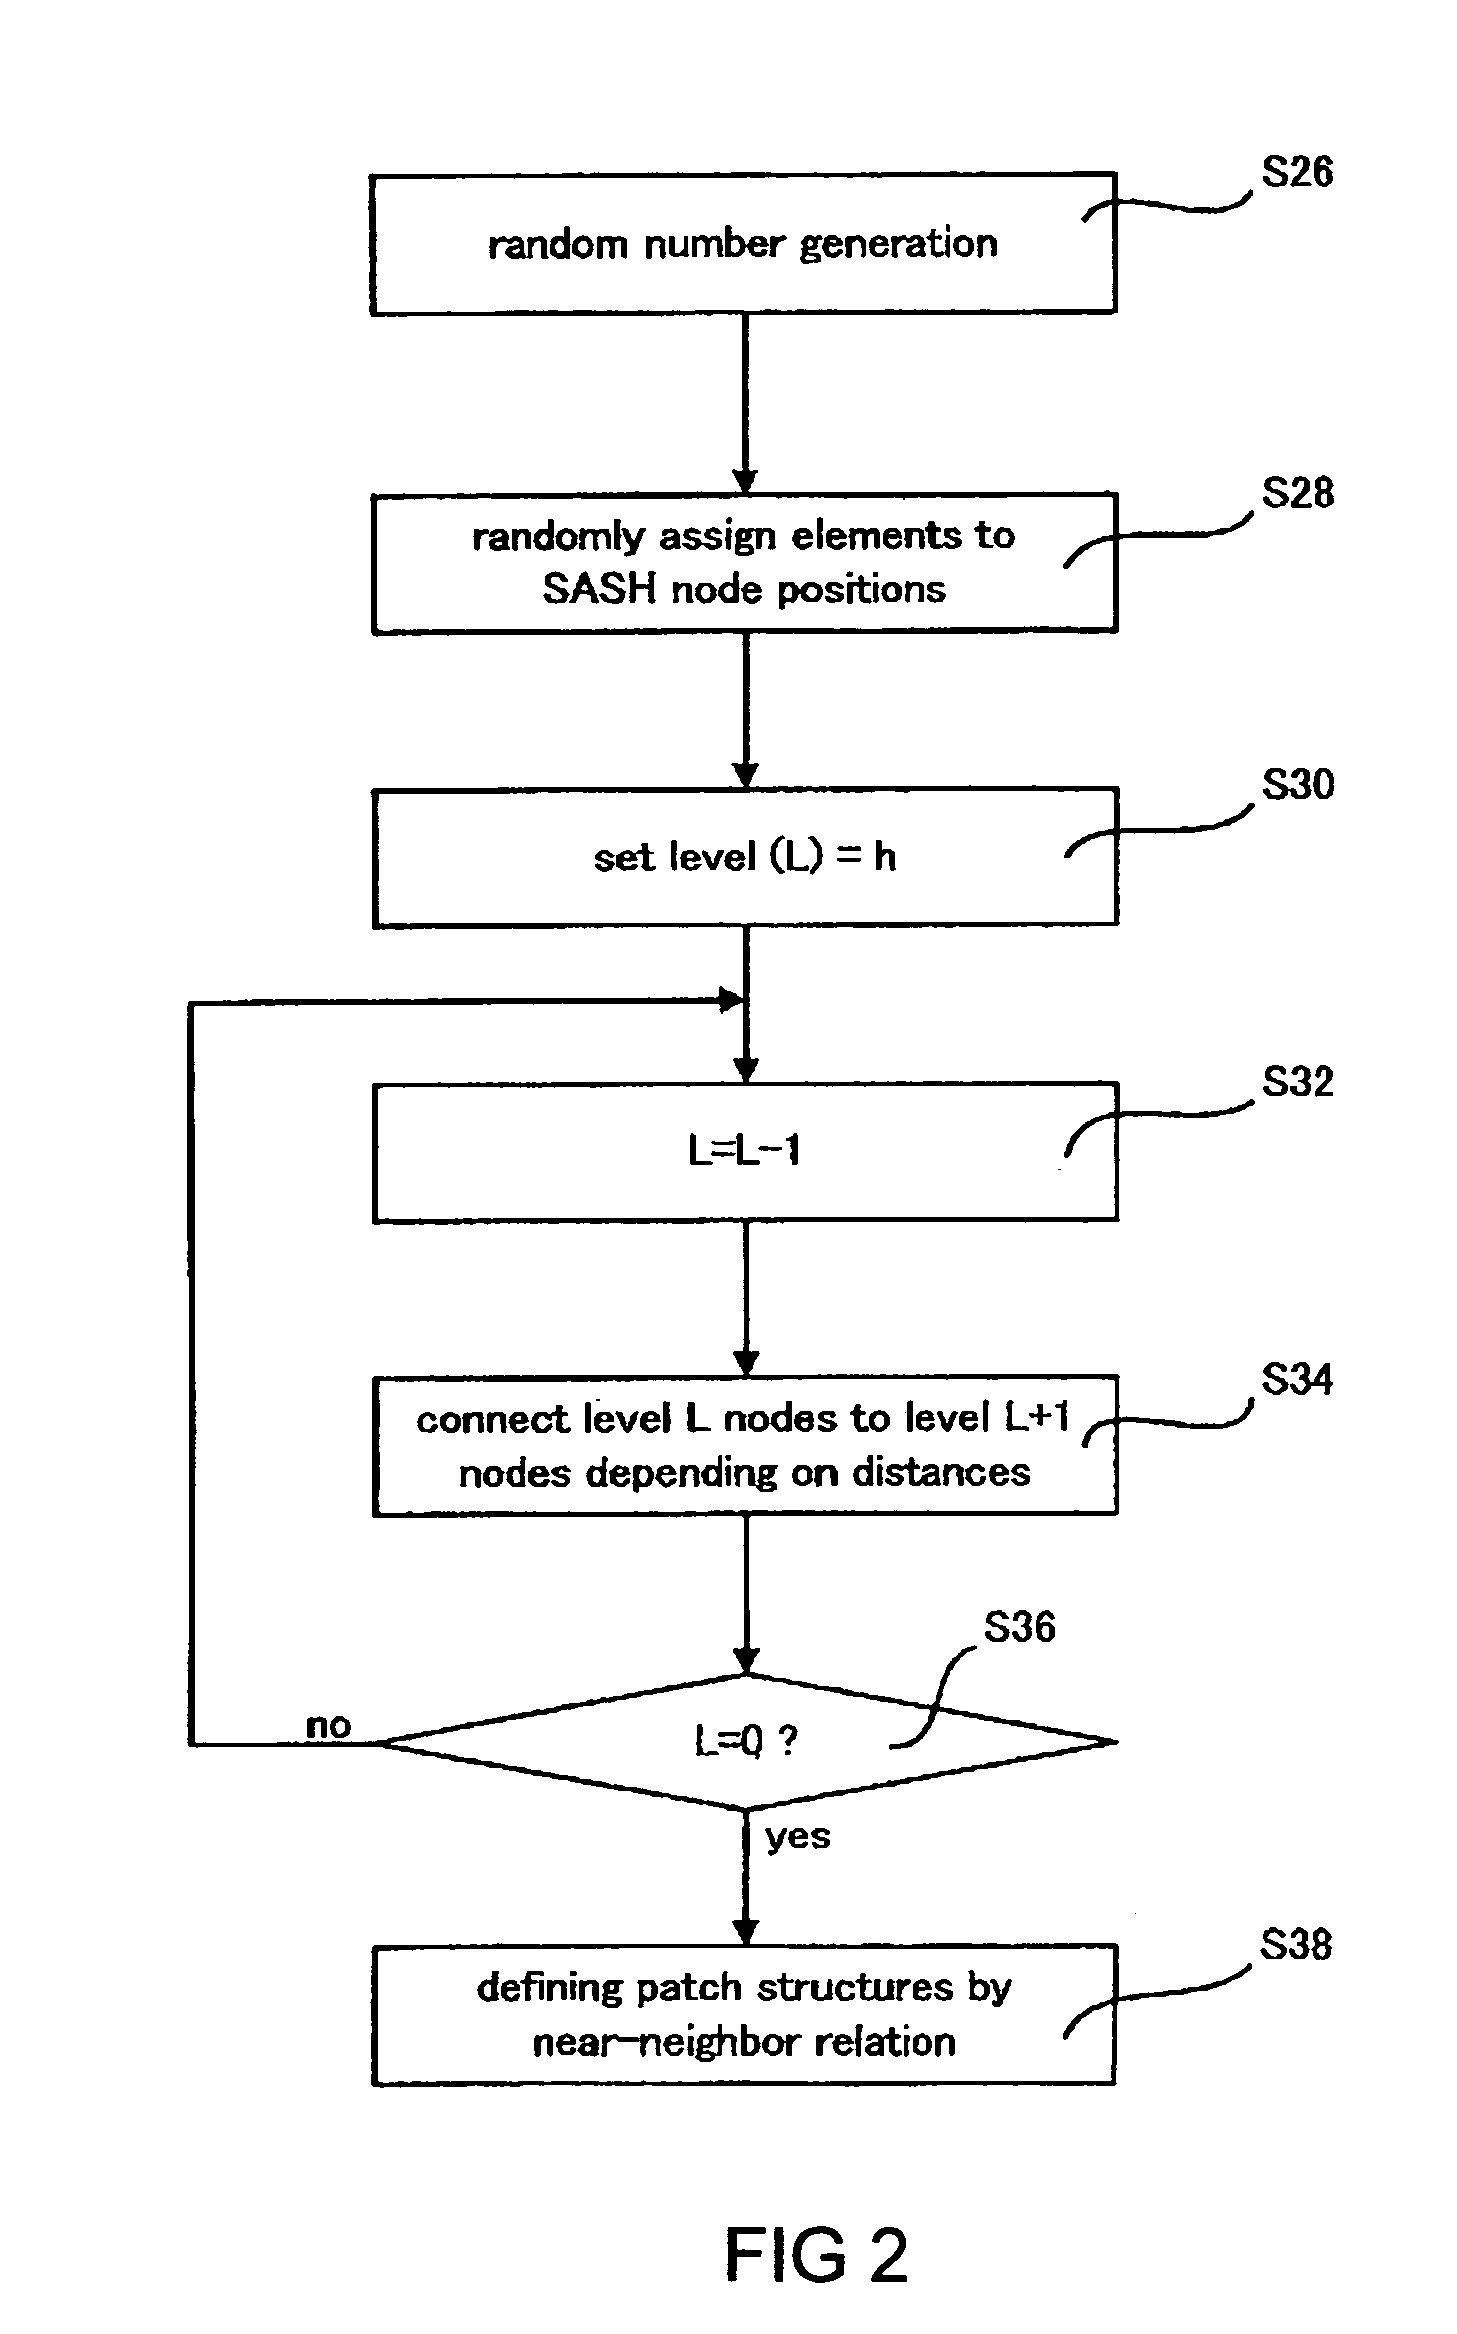 Computer system, method, and program product for generating a data structure for information retrieval, and an associated graphical user interface